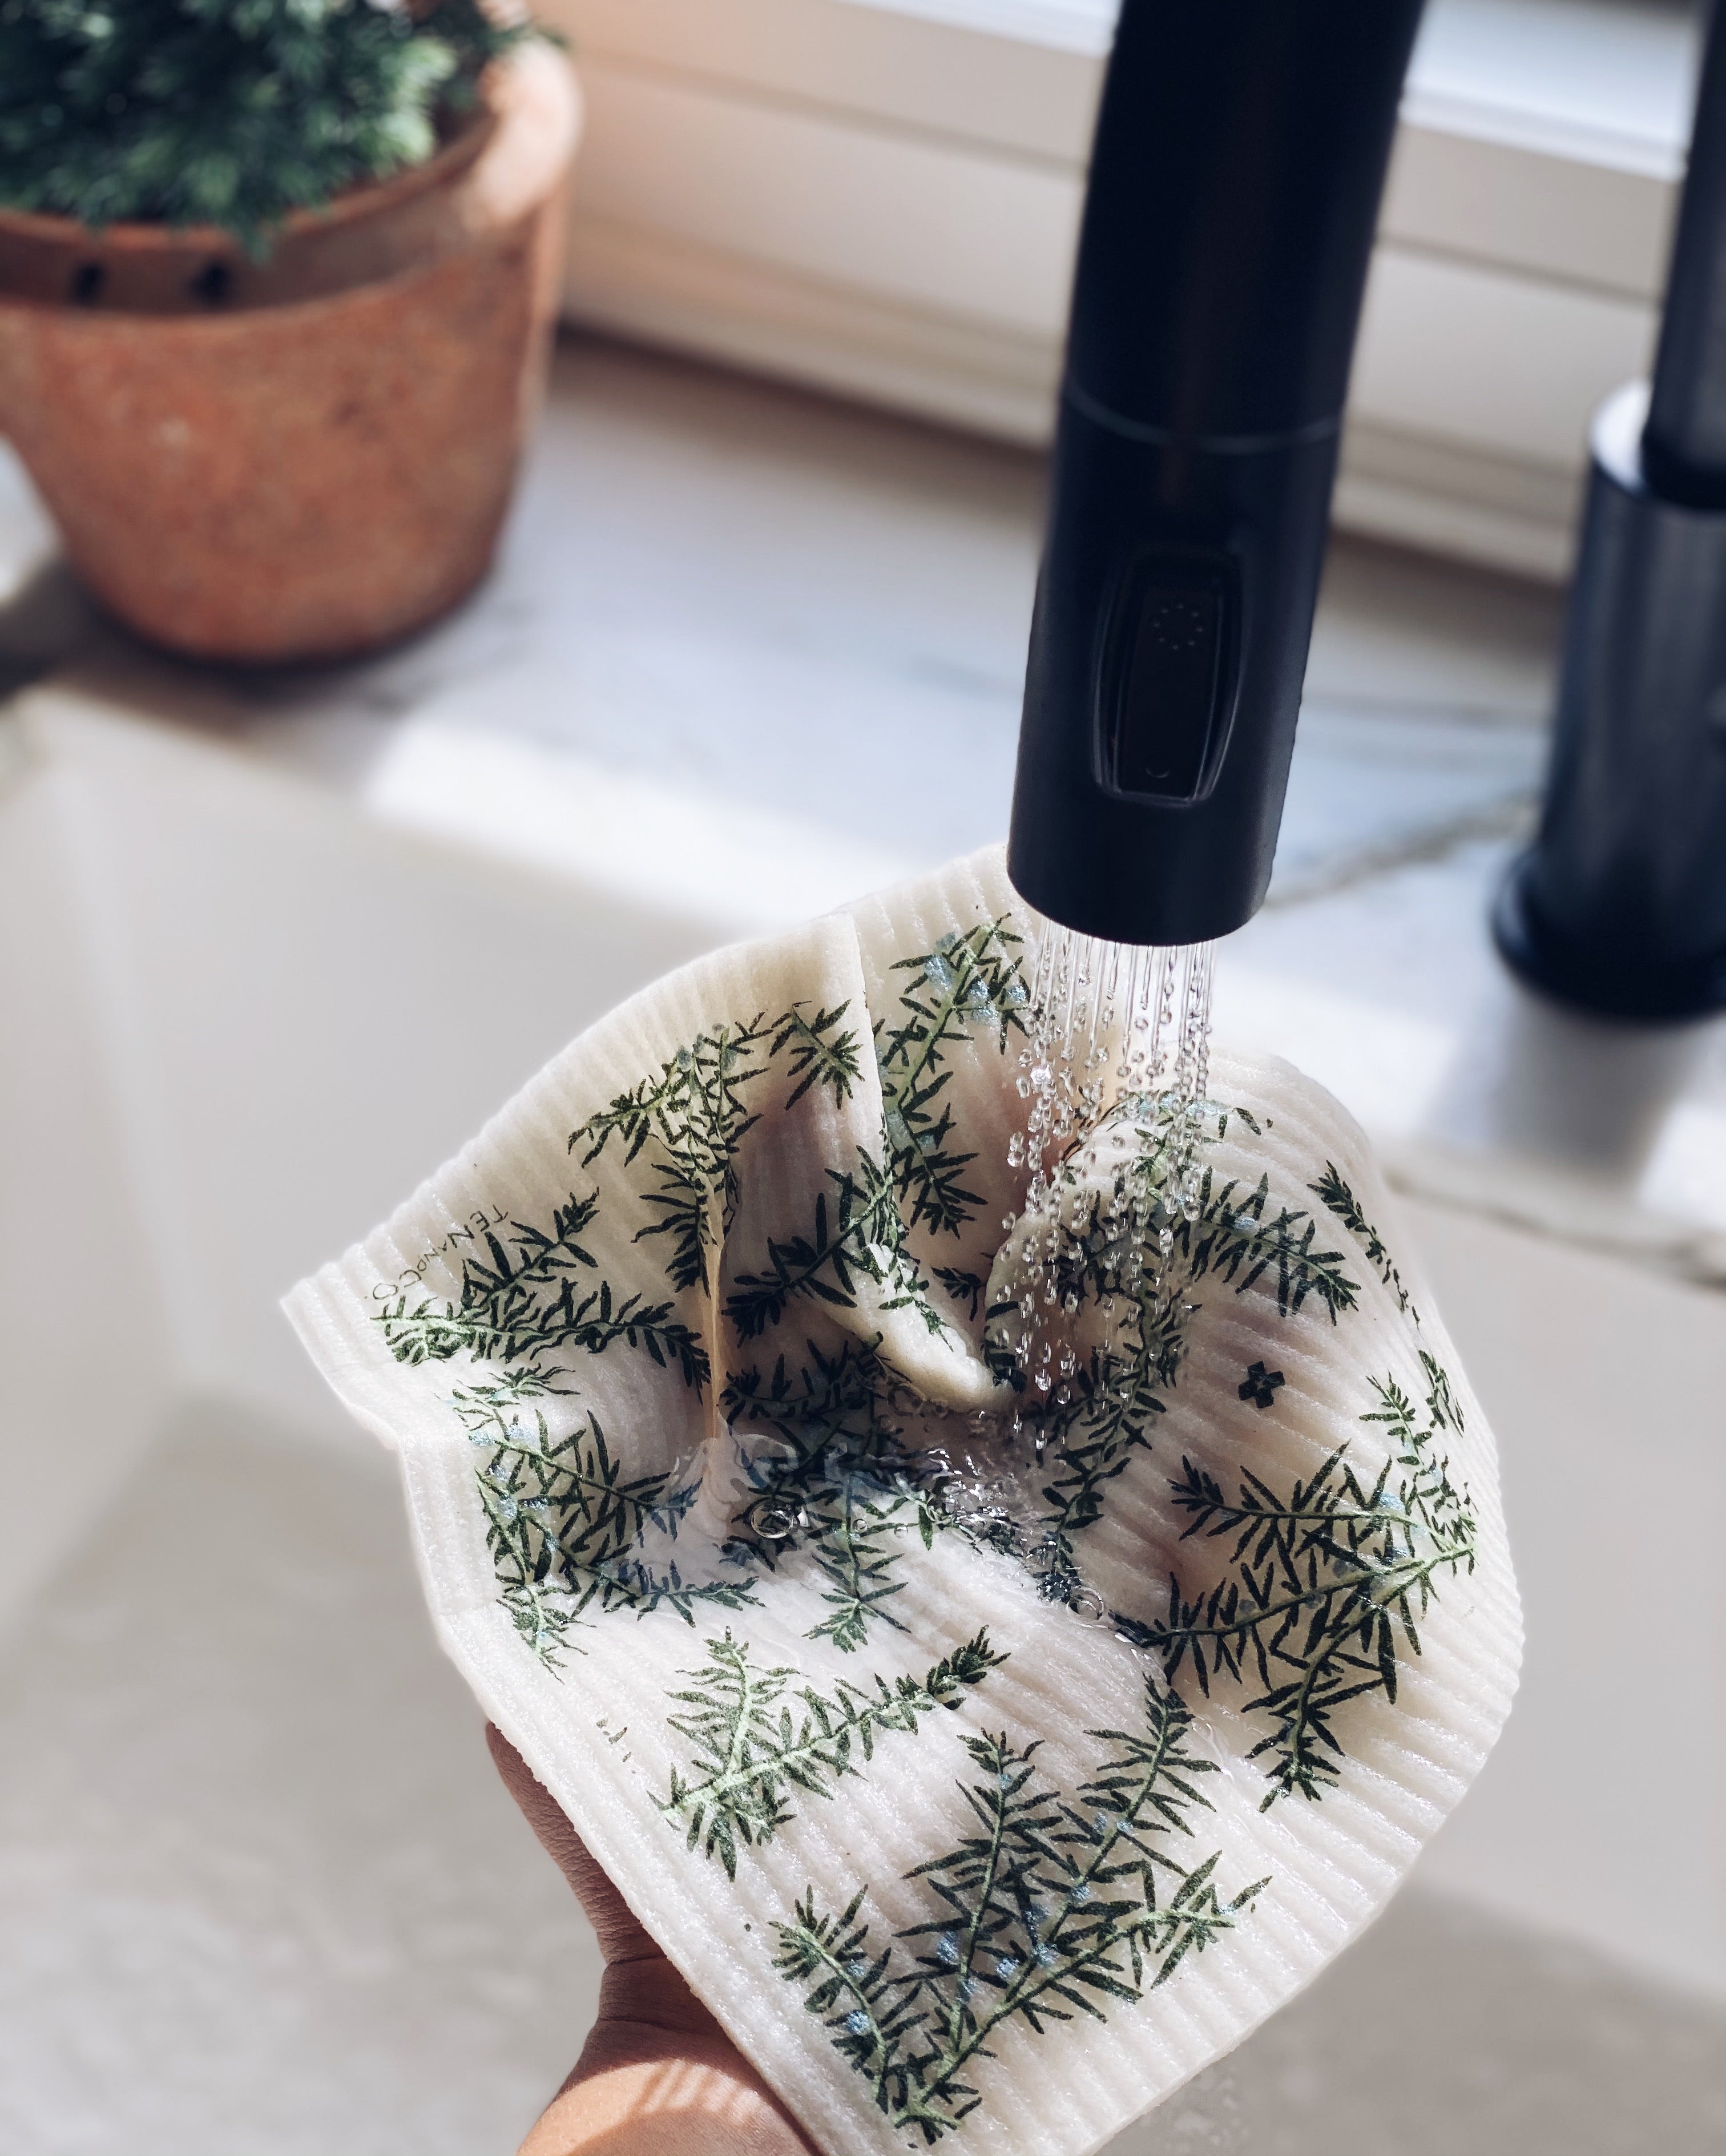 Product image of Juniper Greens on White sponge cloth. There is a white kitchen sink with a black faucet. There is a hand holding the Juniper Greens on White sponge cloth under the running water. There is a small plant on the edge of the sink.